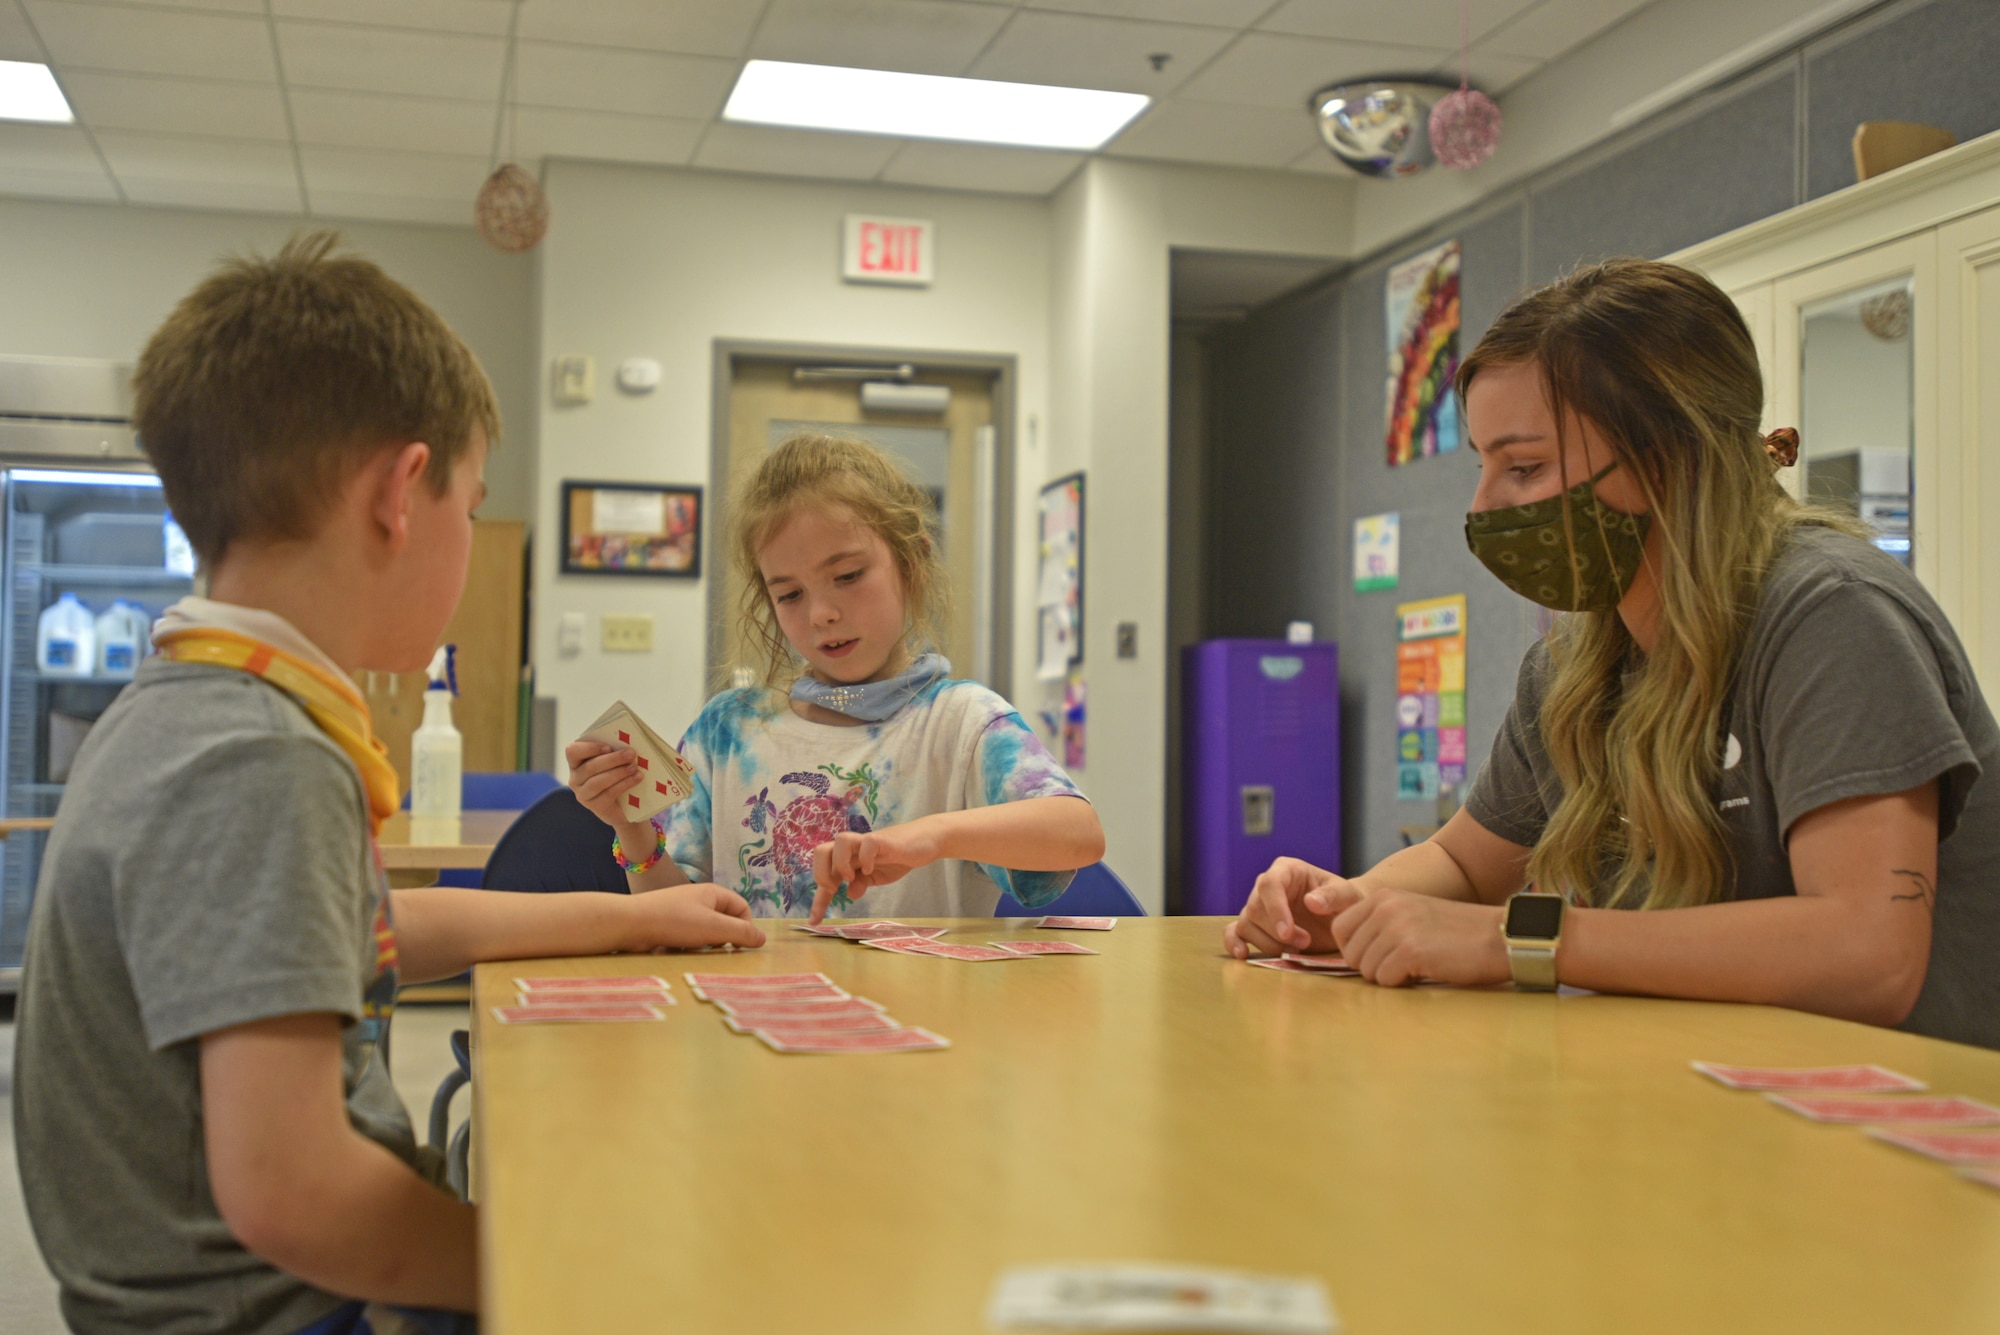 A child youth program assistant plays cards with two children at the School Age Program building on Goodfellow Air Force Base, Texas, April 27, 2021. The CYP assistants work directly with the kids, engaging and playing with them while assisting them in any way when they are at the School Age Program. (U.S. Air Force photo by Senior Airman Ashley Thrash)